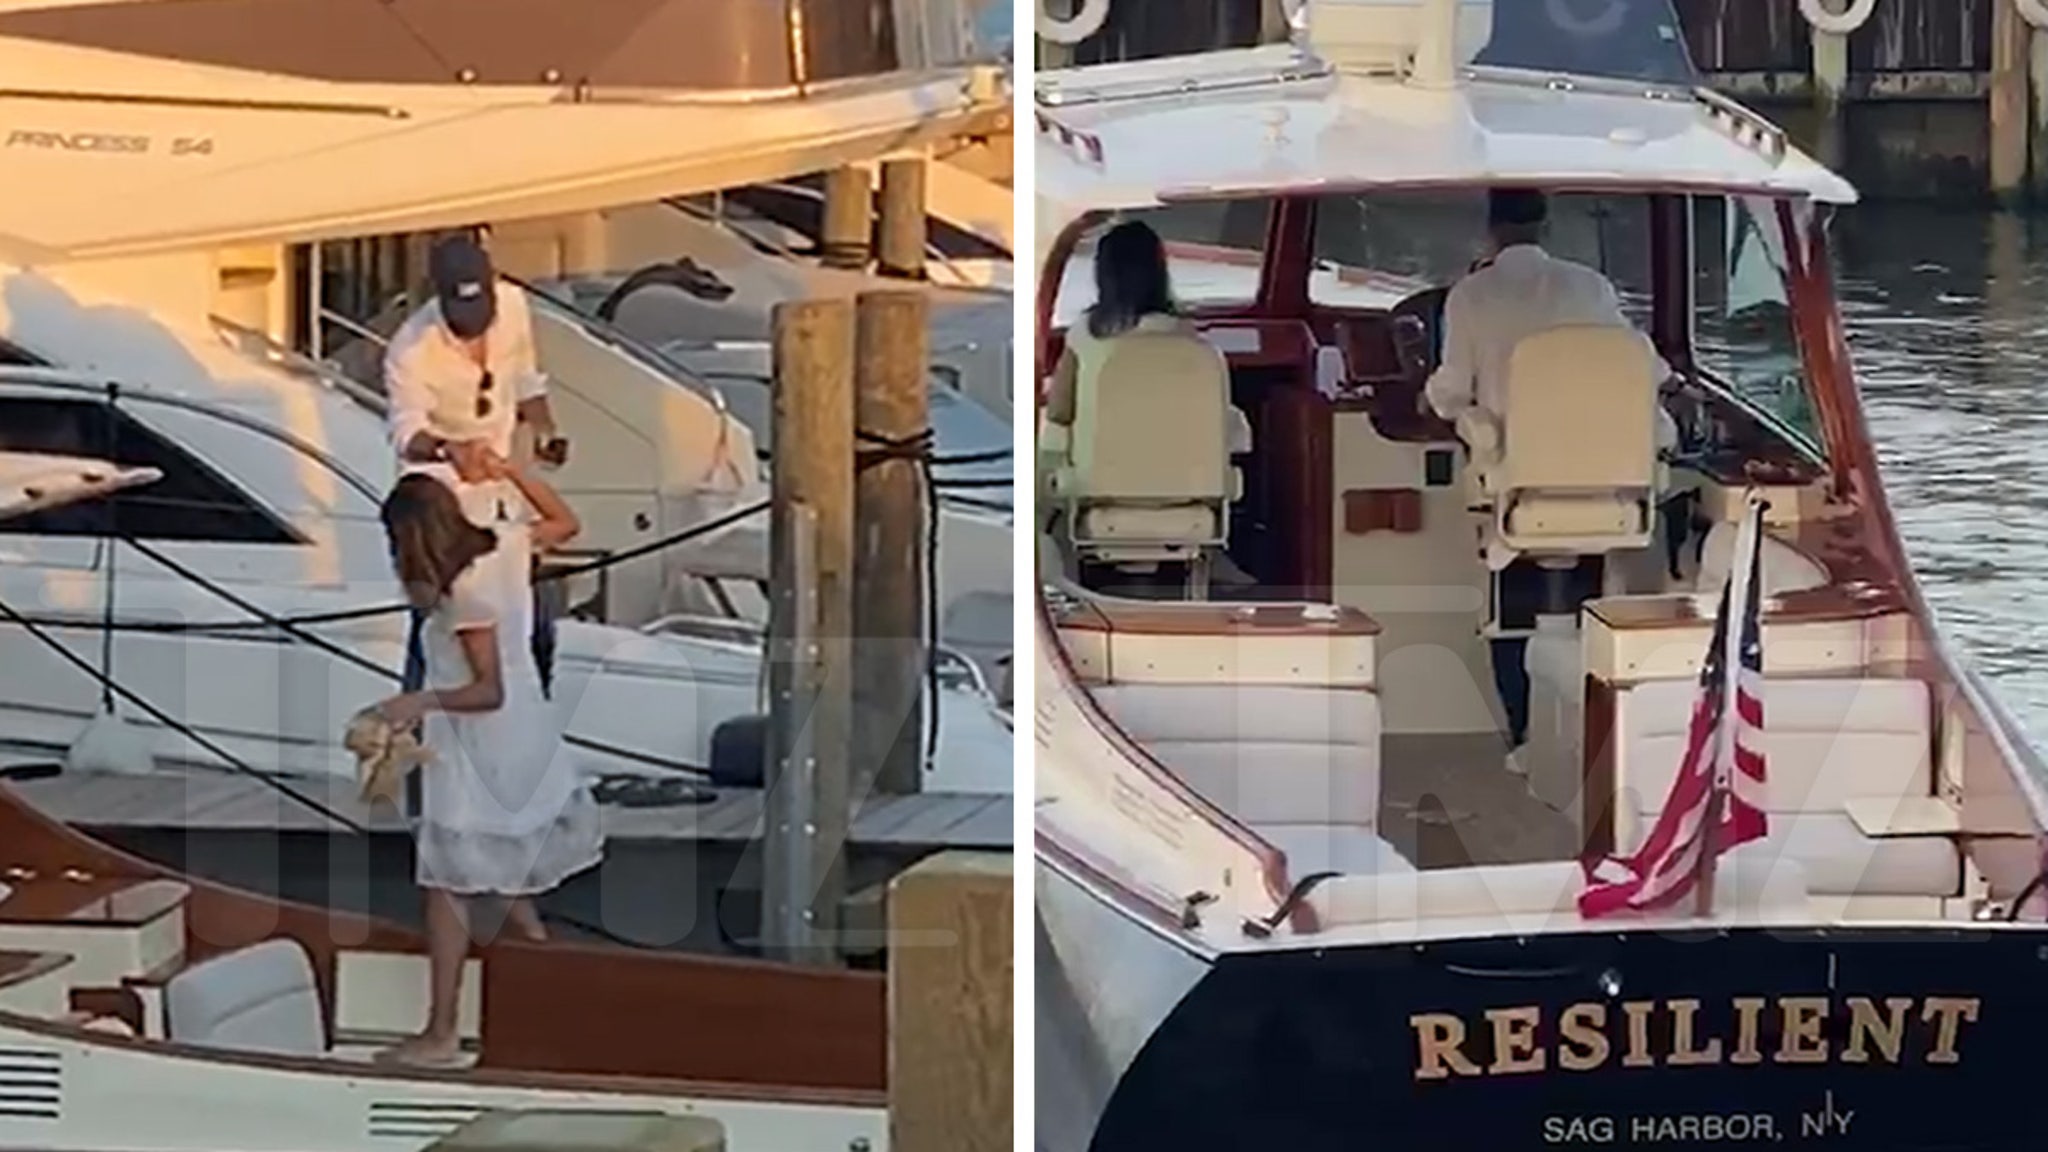 Matt Lauer Dines with Mystery Woman Before Yachting on 'Resilient' - TMZ